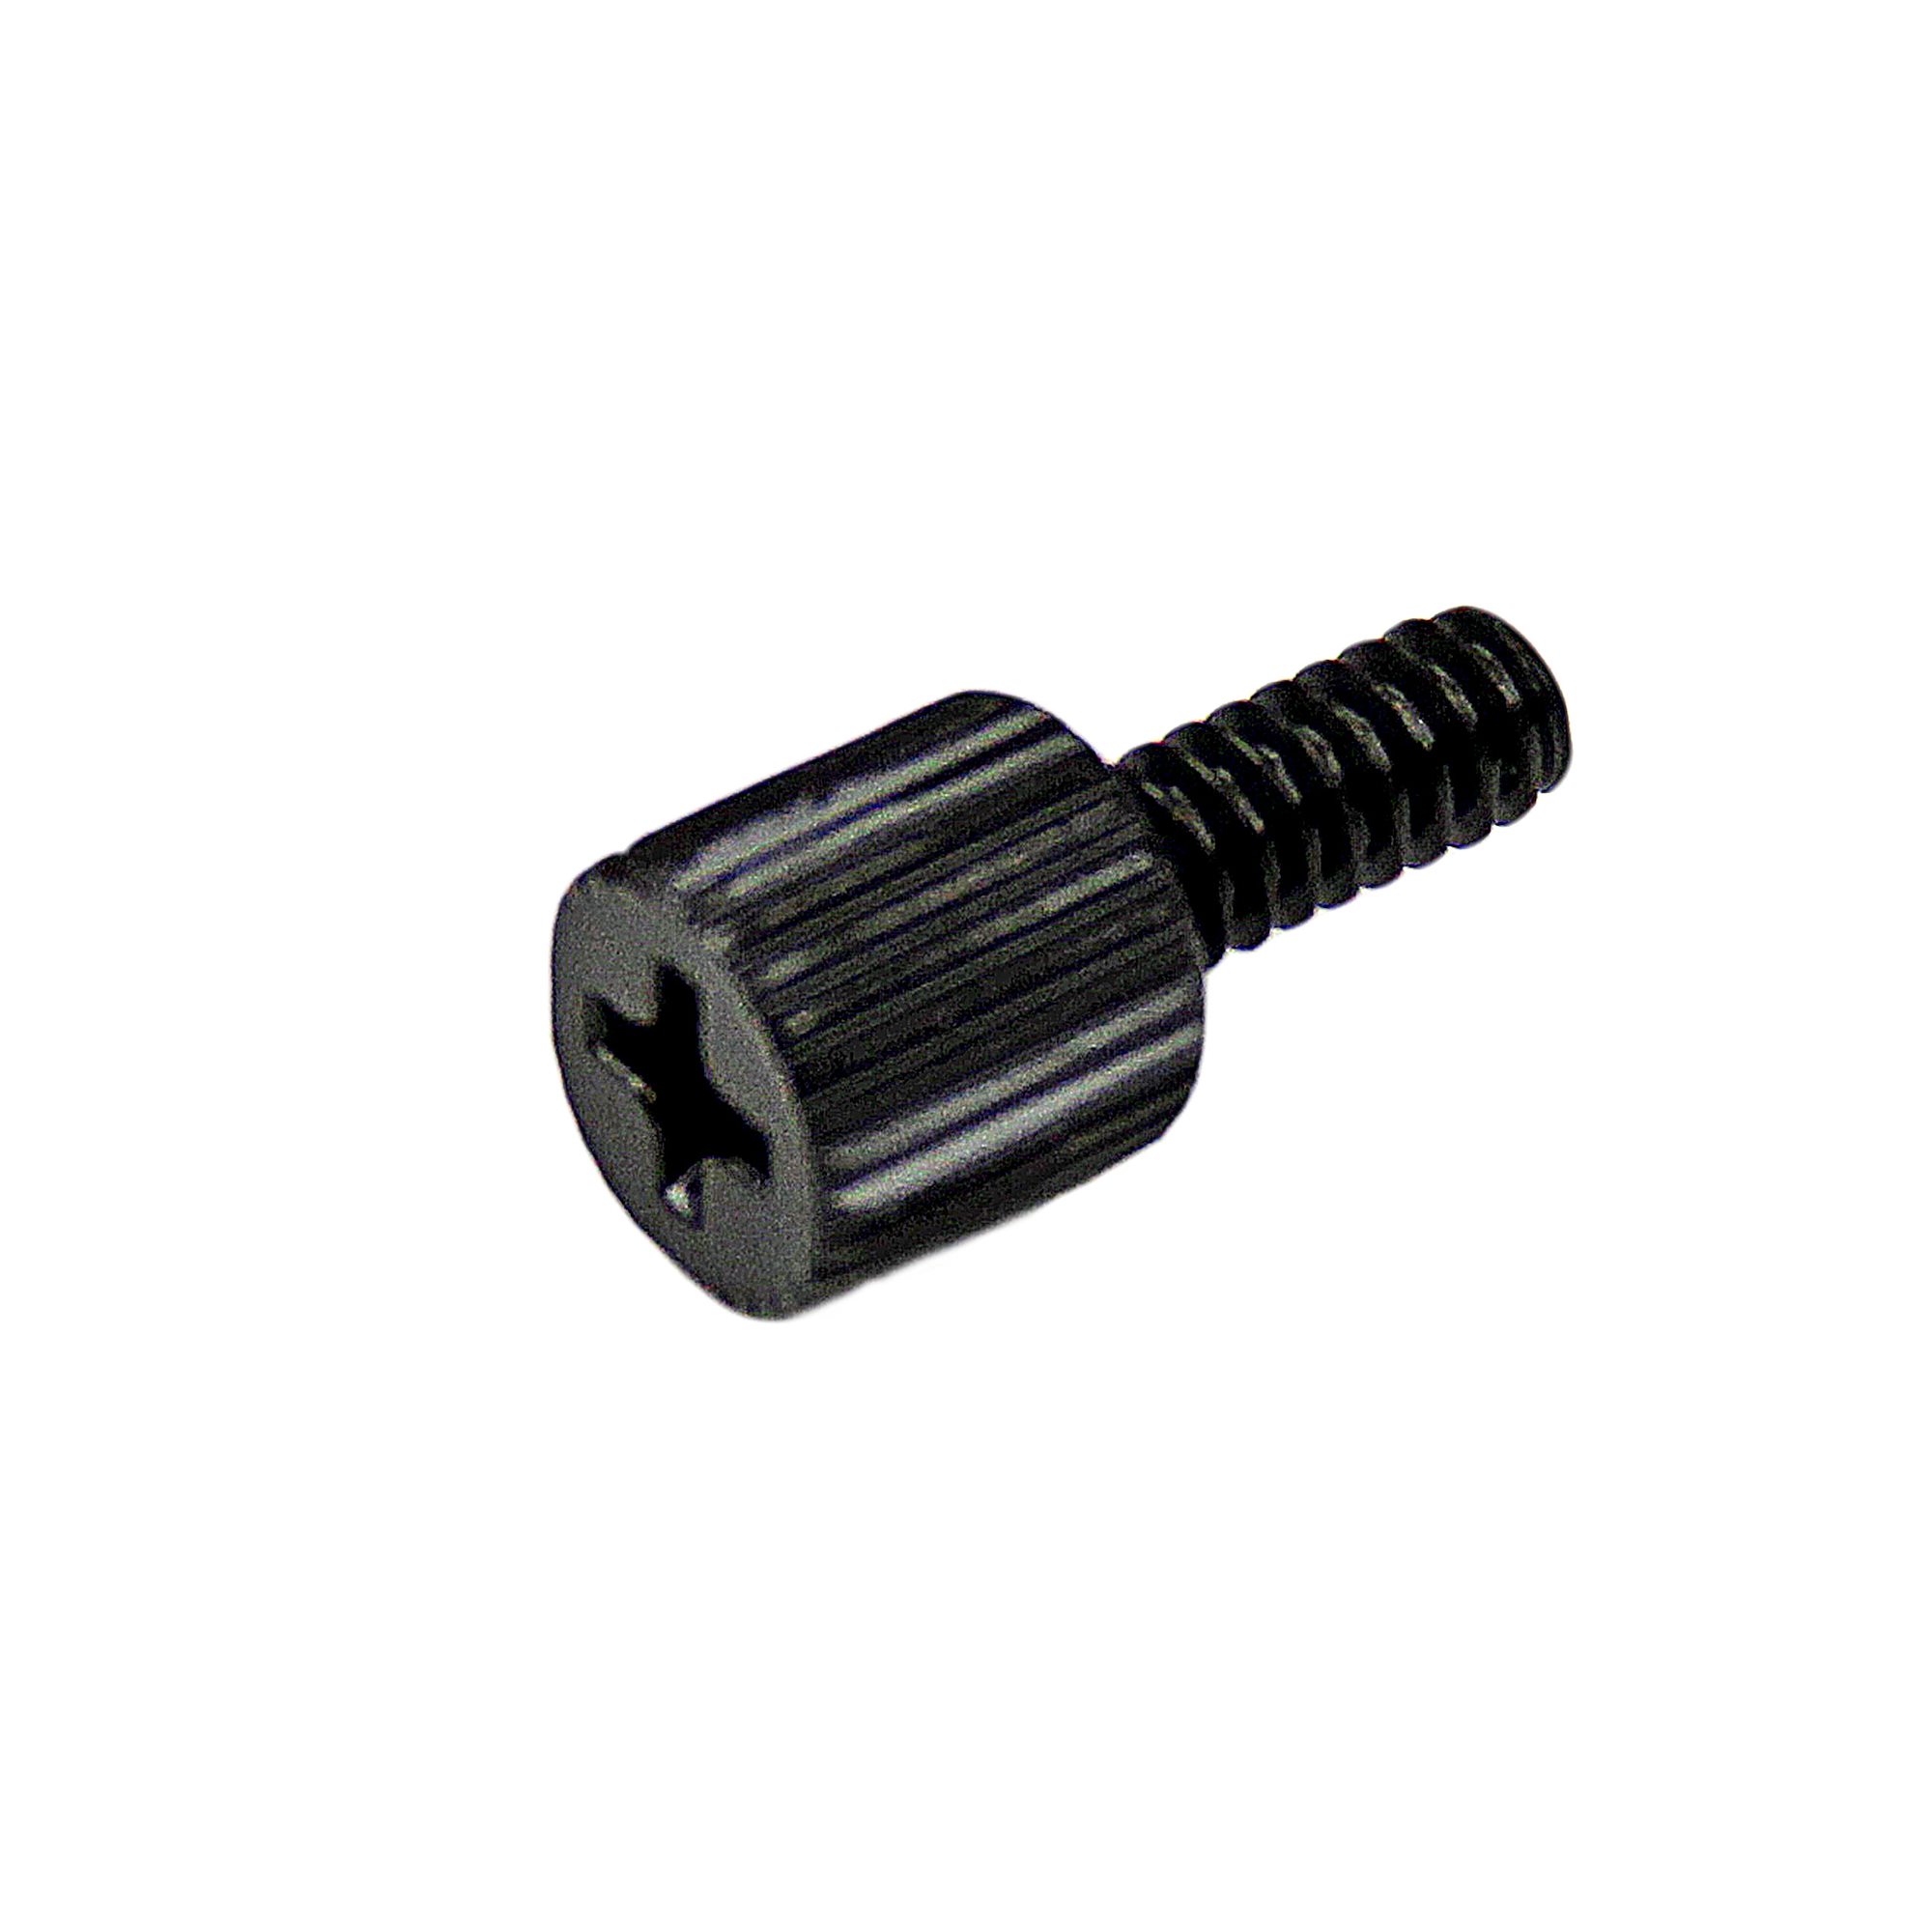 Details about   4pcs Computer PC Case Fully Threaded Knurled M3 Thumb Screws Length 5mm 50mm 